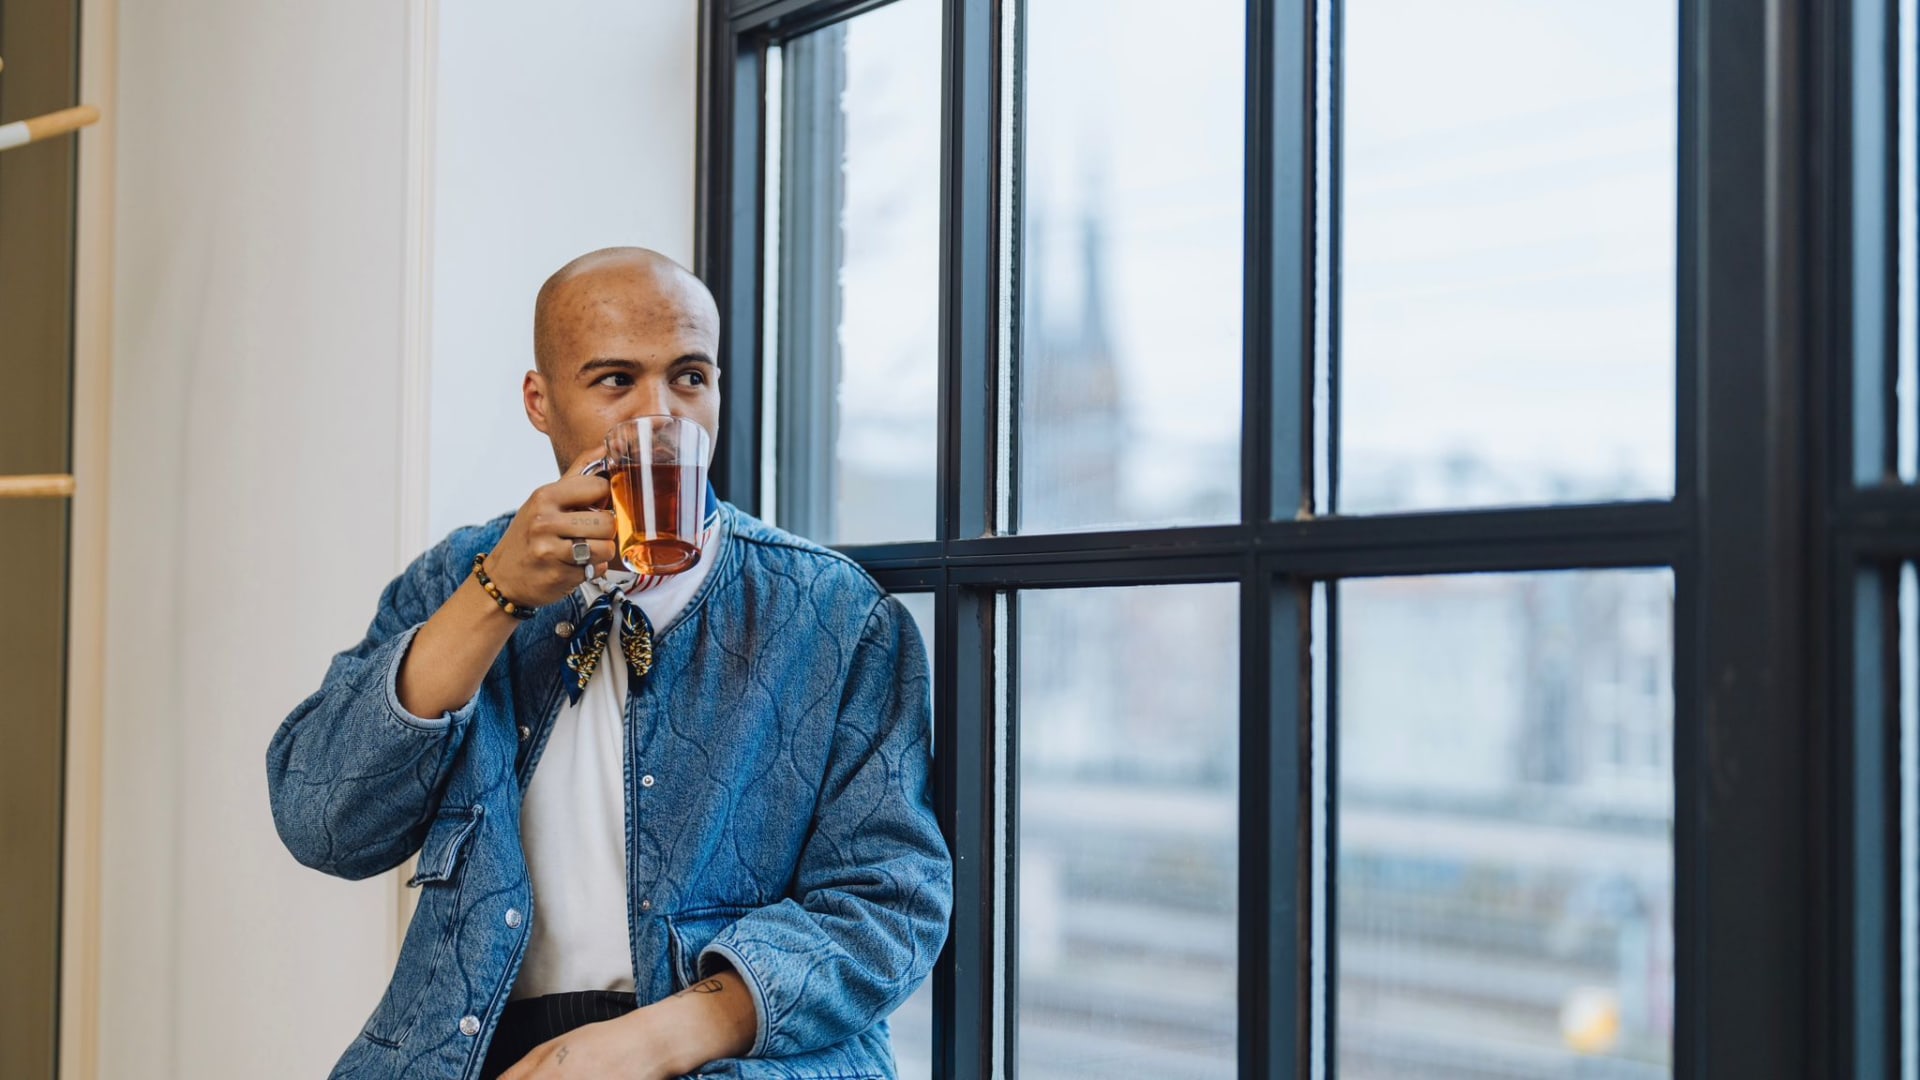 Employee enjoys cup of tea while looking outside 